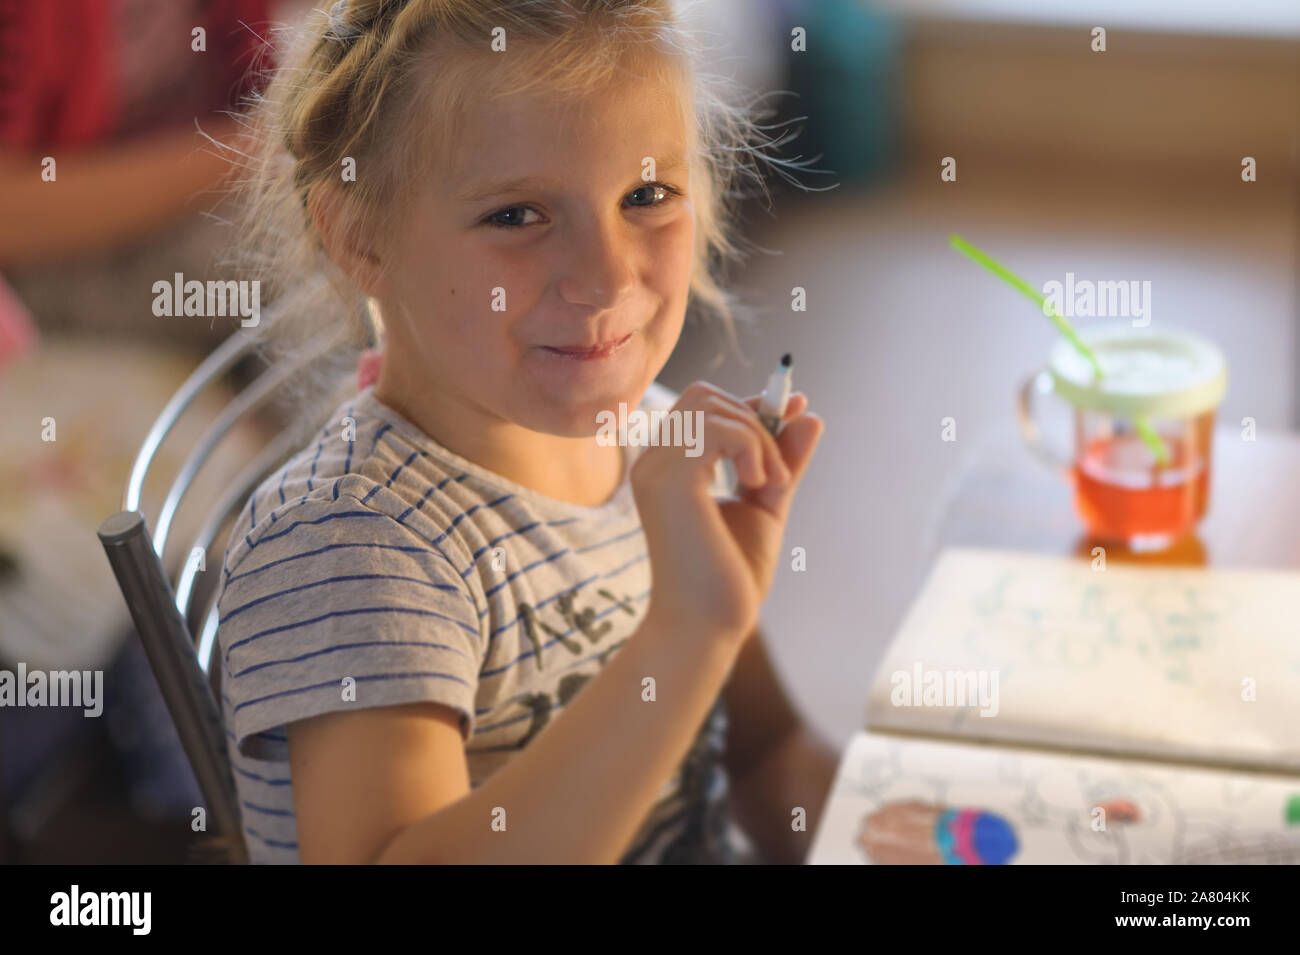 Cute little girl painting a picture in a home interior. Stock Photo